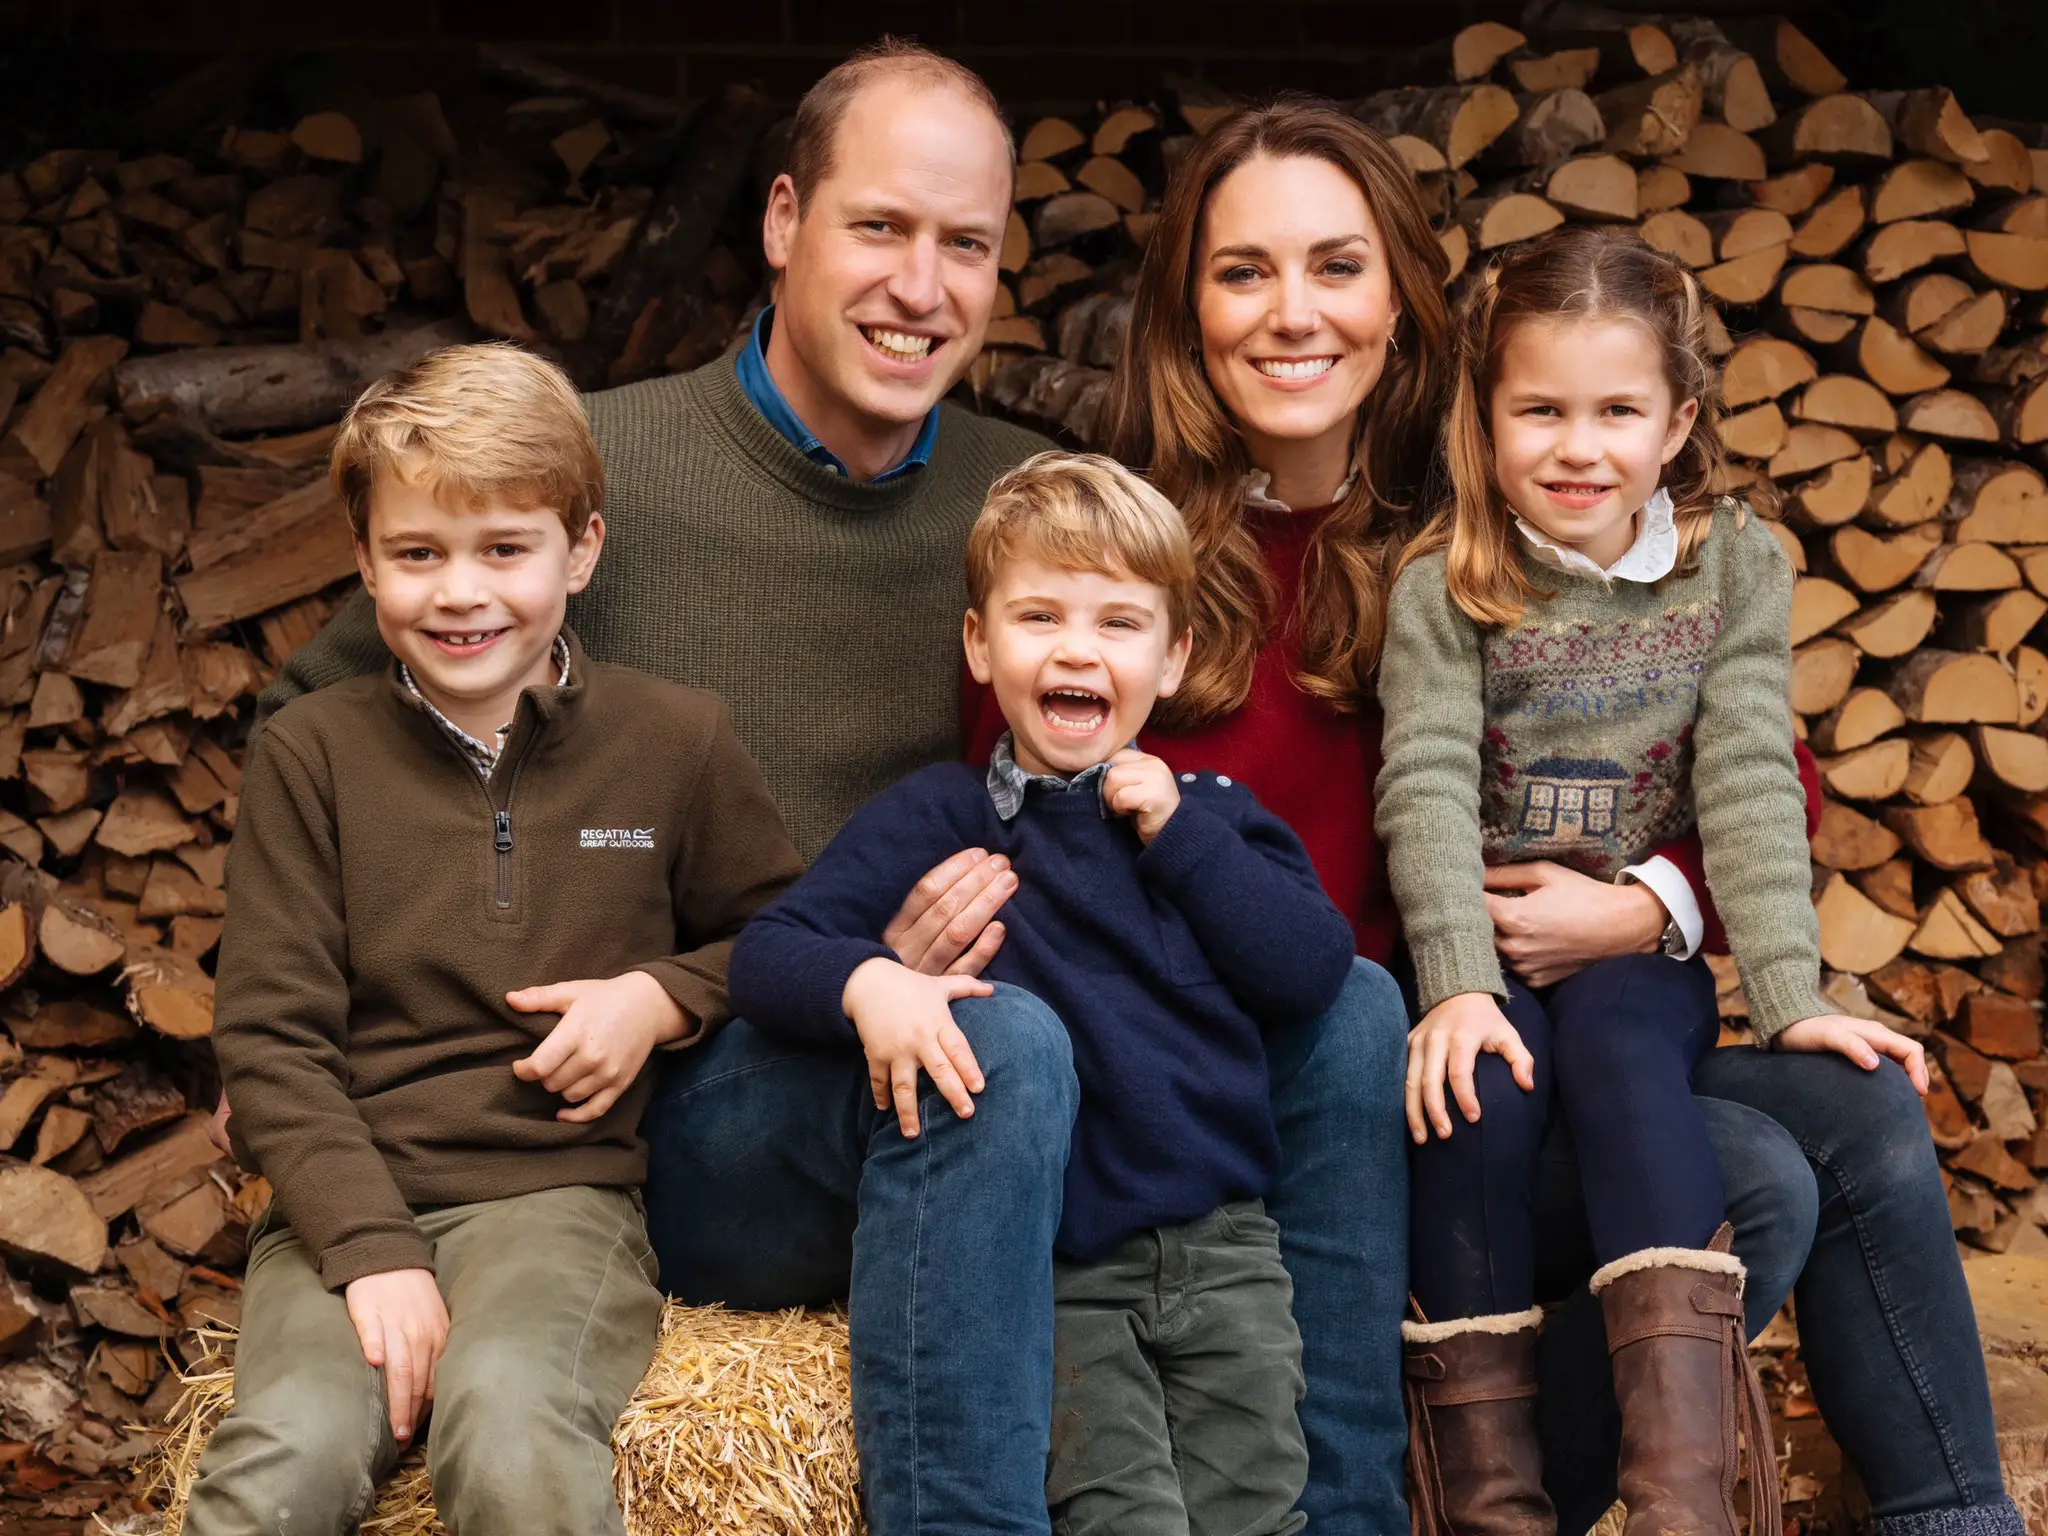 The Duke and Duchess of Cambridge released a candid Christmas Card Family picture